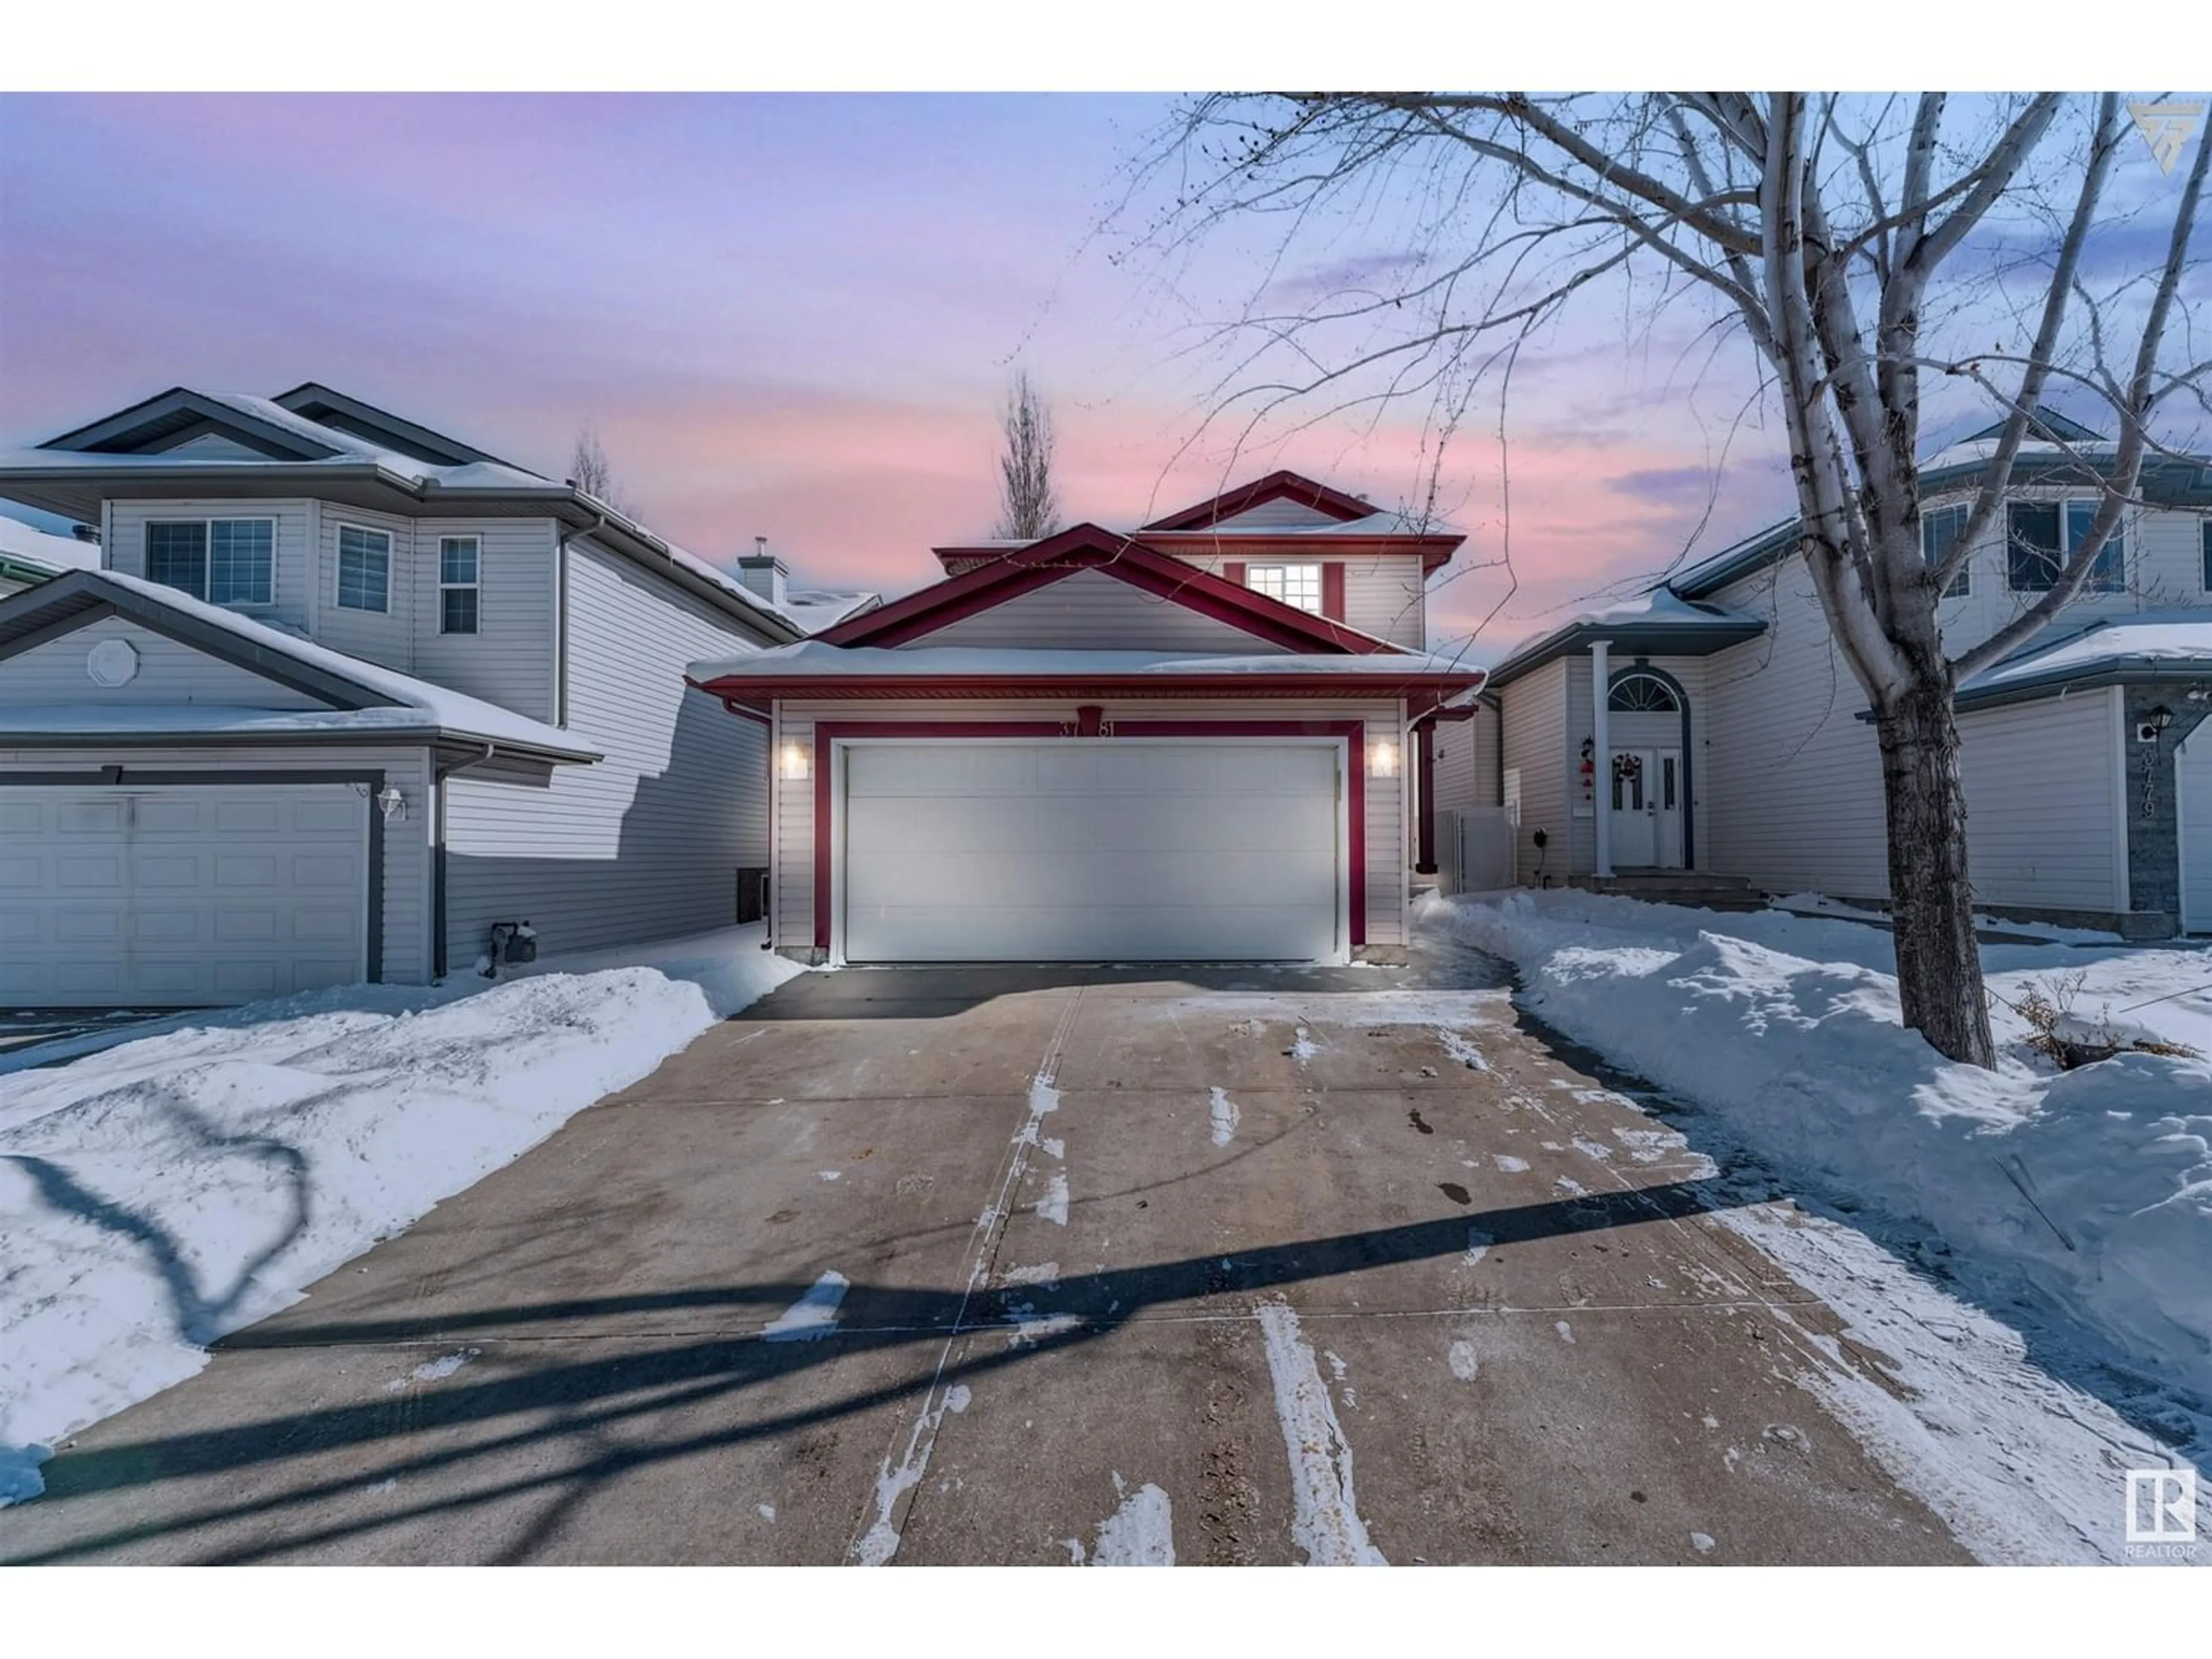 Frontside or backside of a home for 3781 21 st NW, Edmonton Alberta T6T1R5